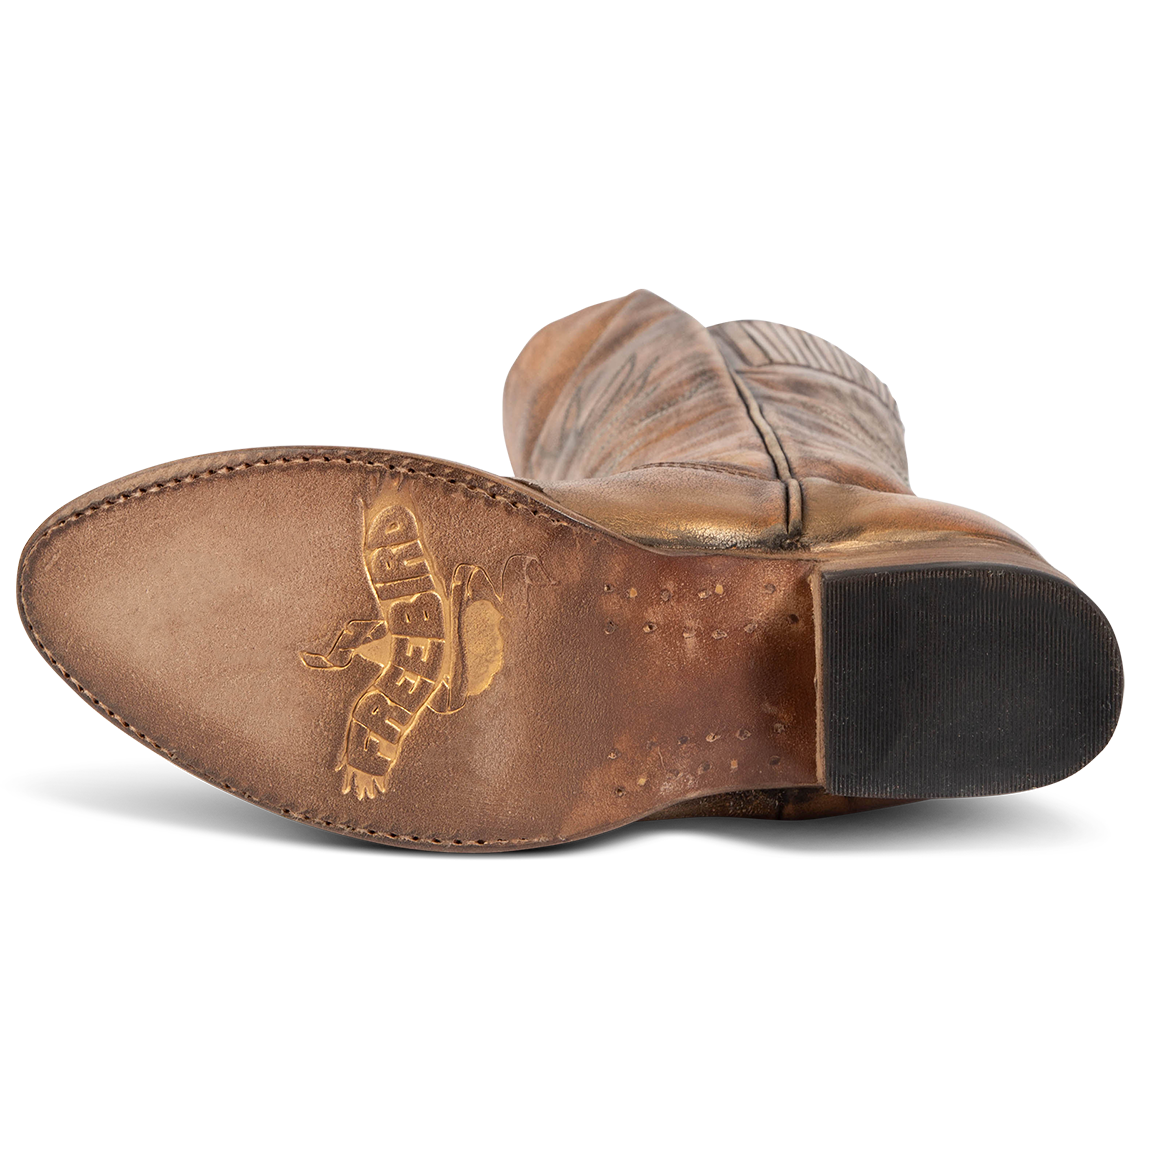 Leather sole imprinted with FREEBIRD on Whisper bronze distressed tall boot